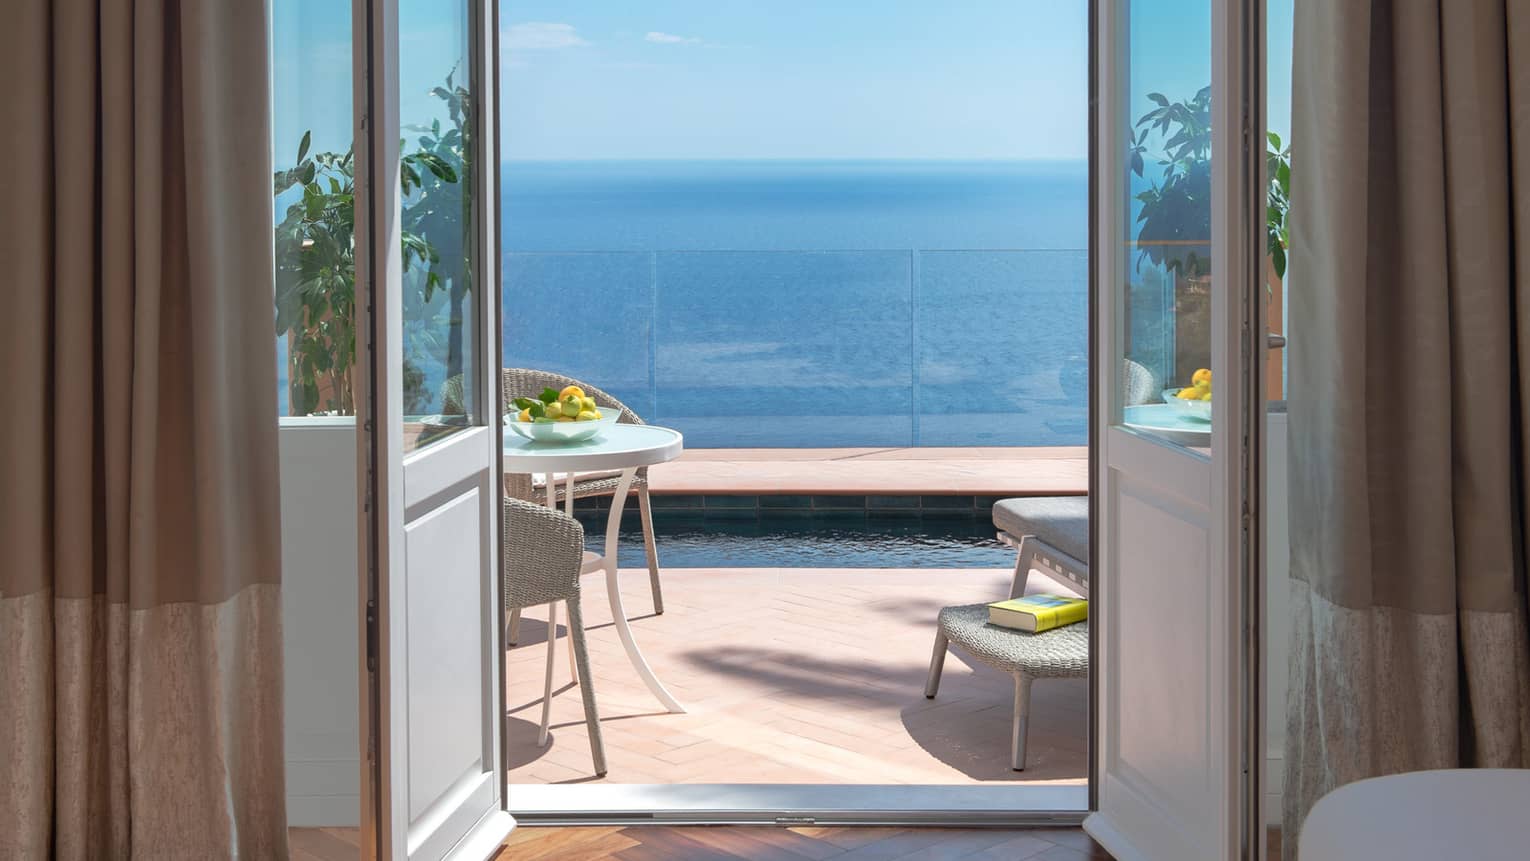 Door leading to private terrace with plunge pool overlooking the sea